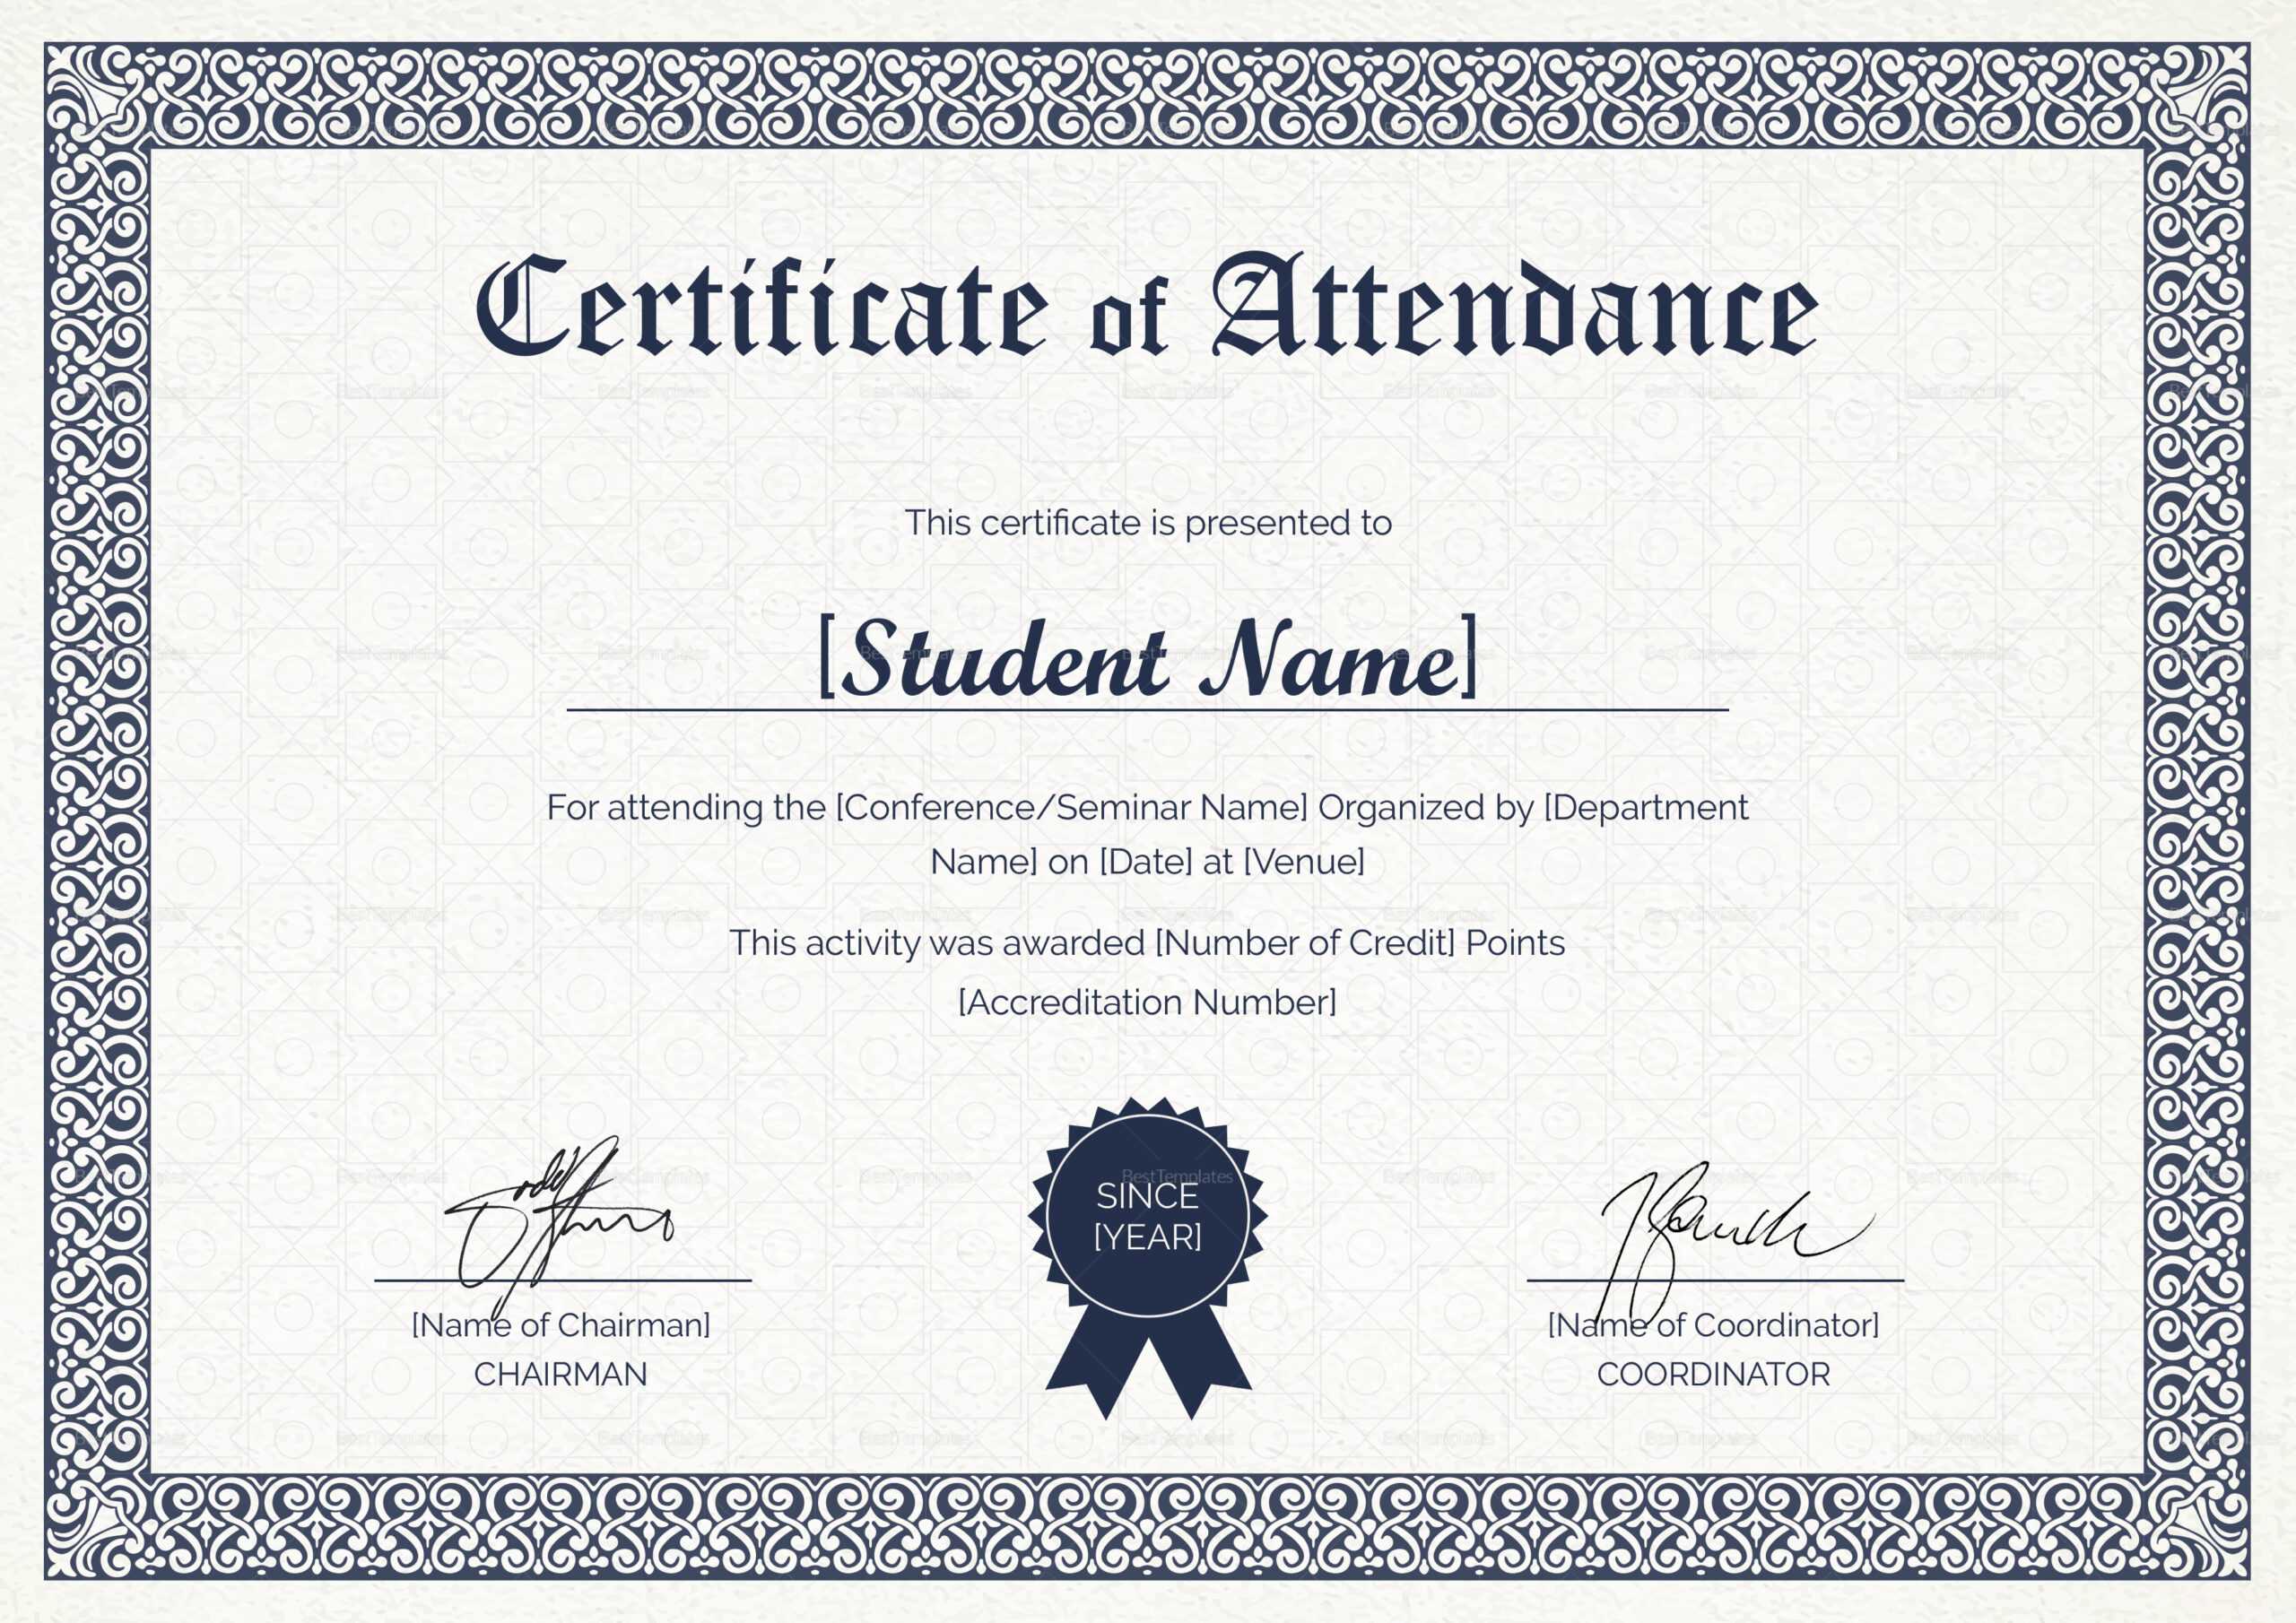 Students Attendance Certificate Template With Certificate Of Attendance Conference Template